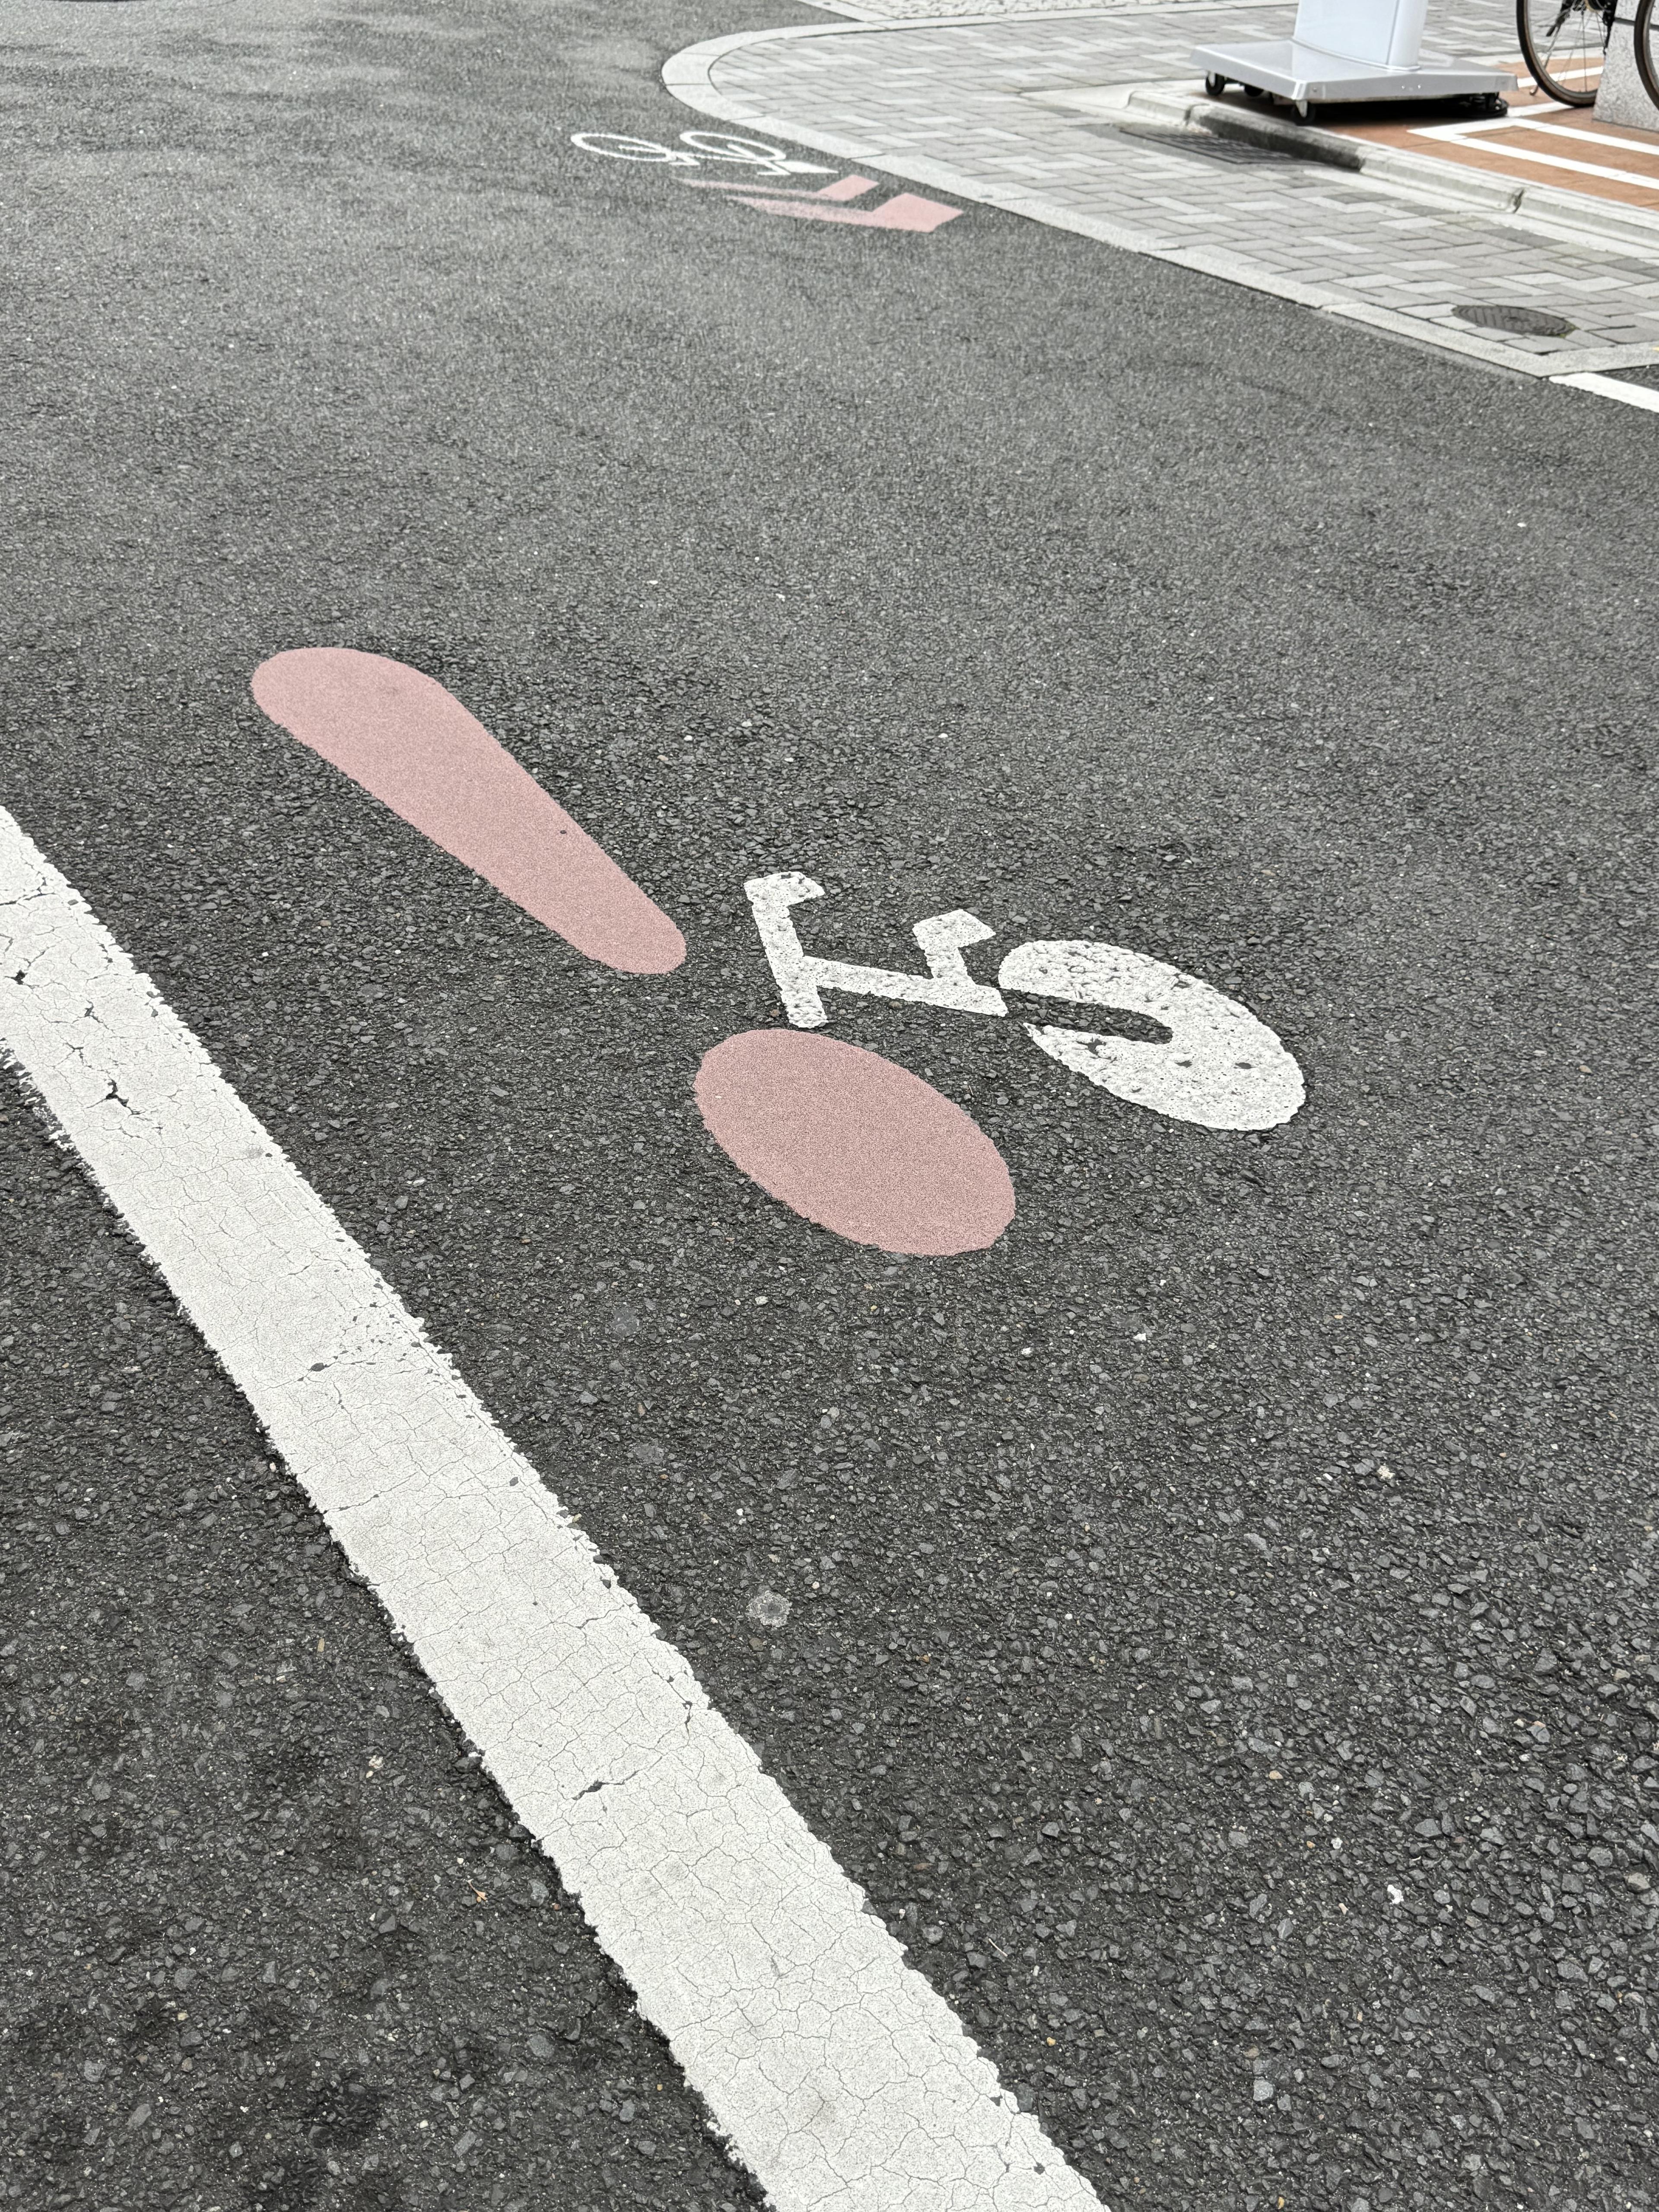 A sign on the bike path in Kyoto, combining an exclamation mark with the front wheel of an abstract bike